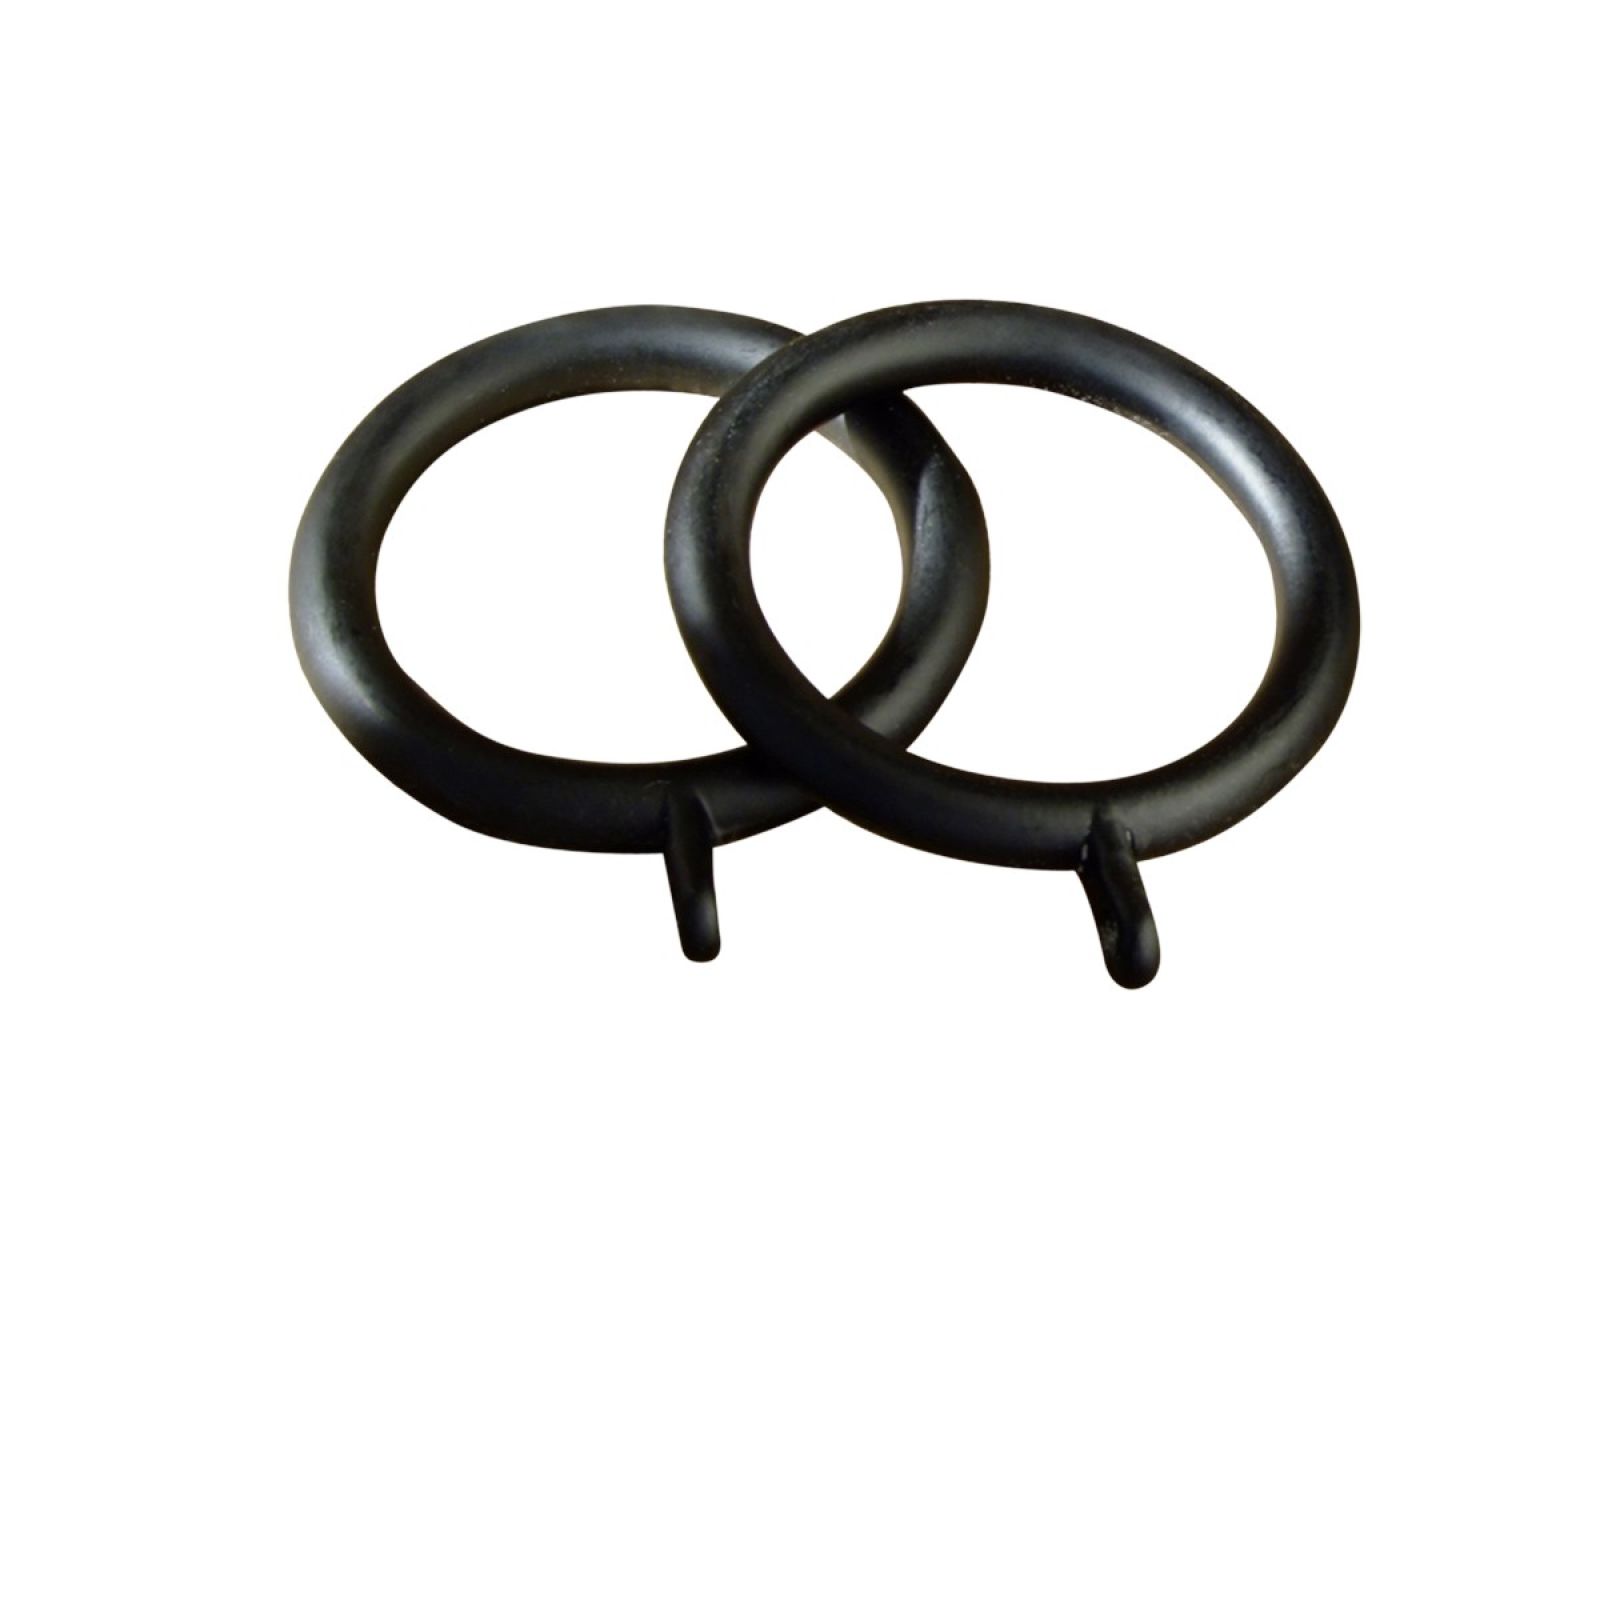 Wrought Iron Curtain Rings